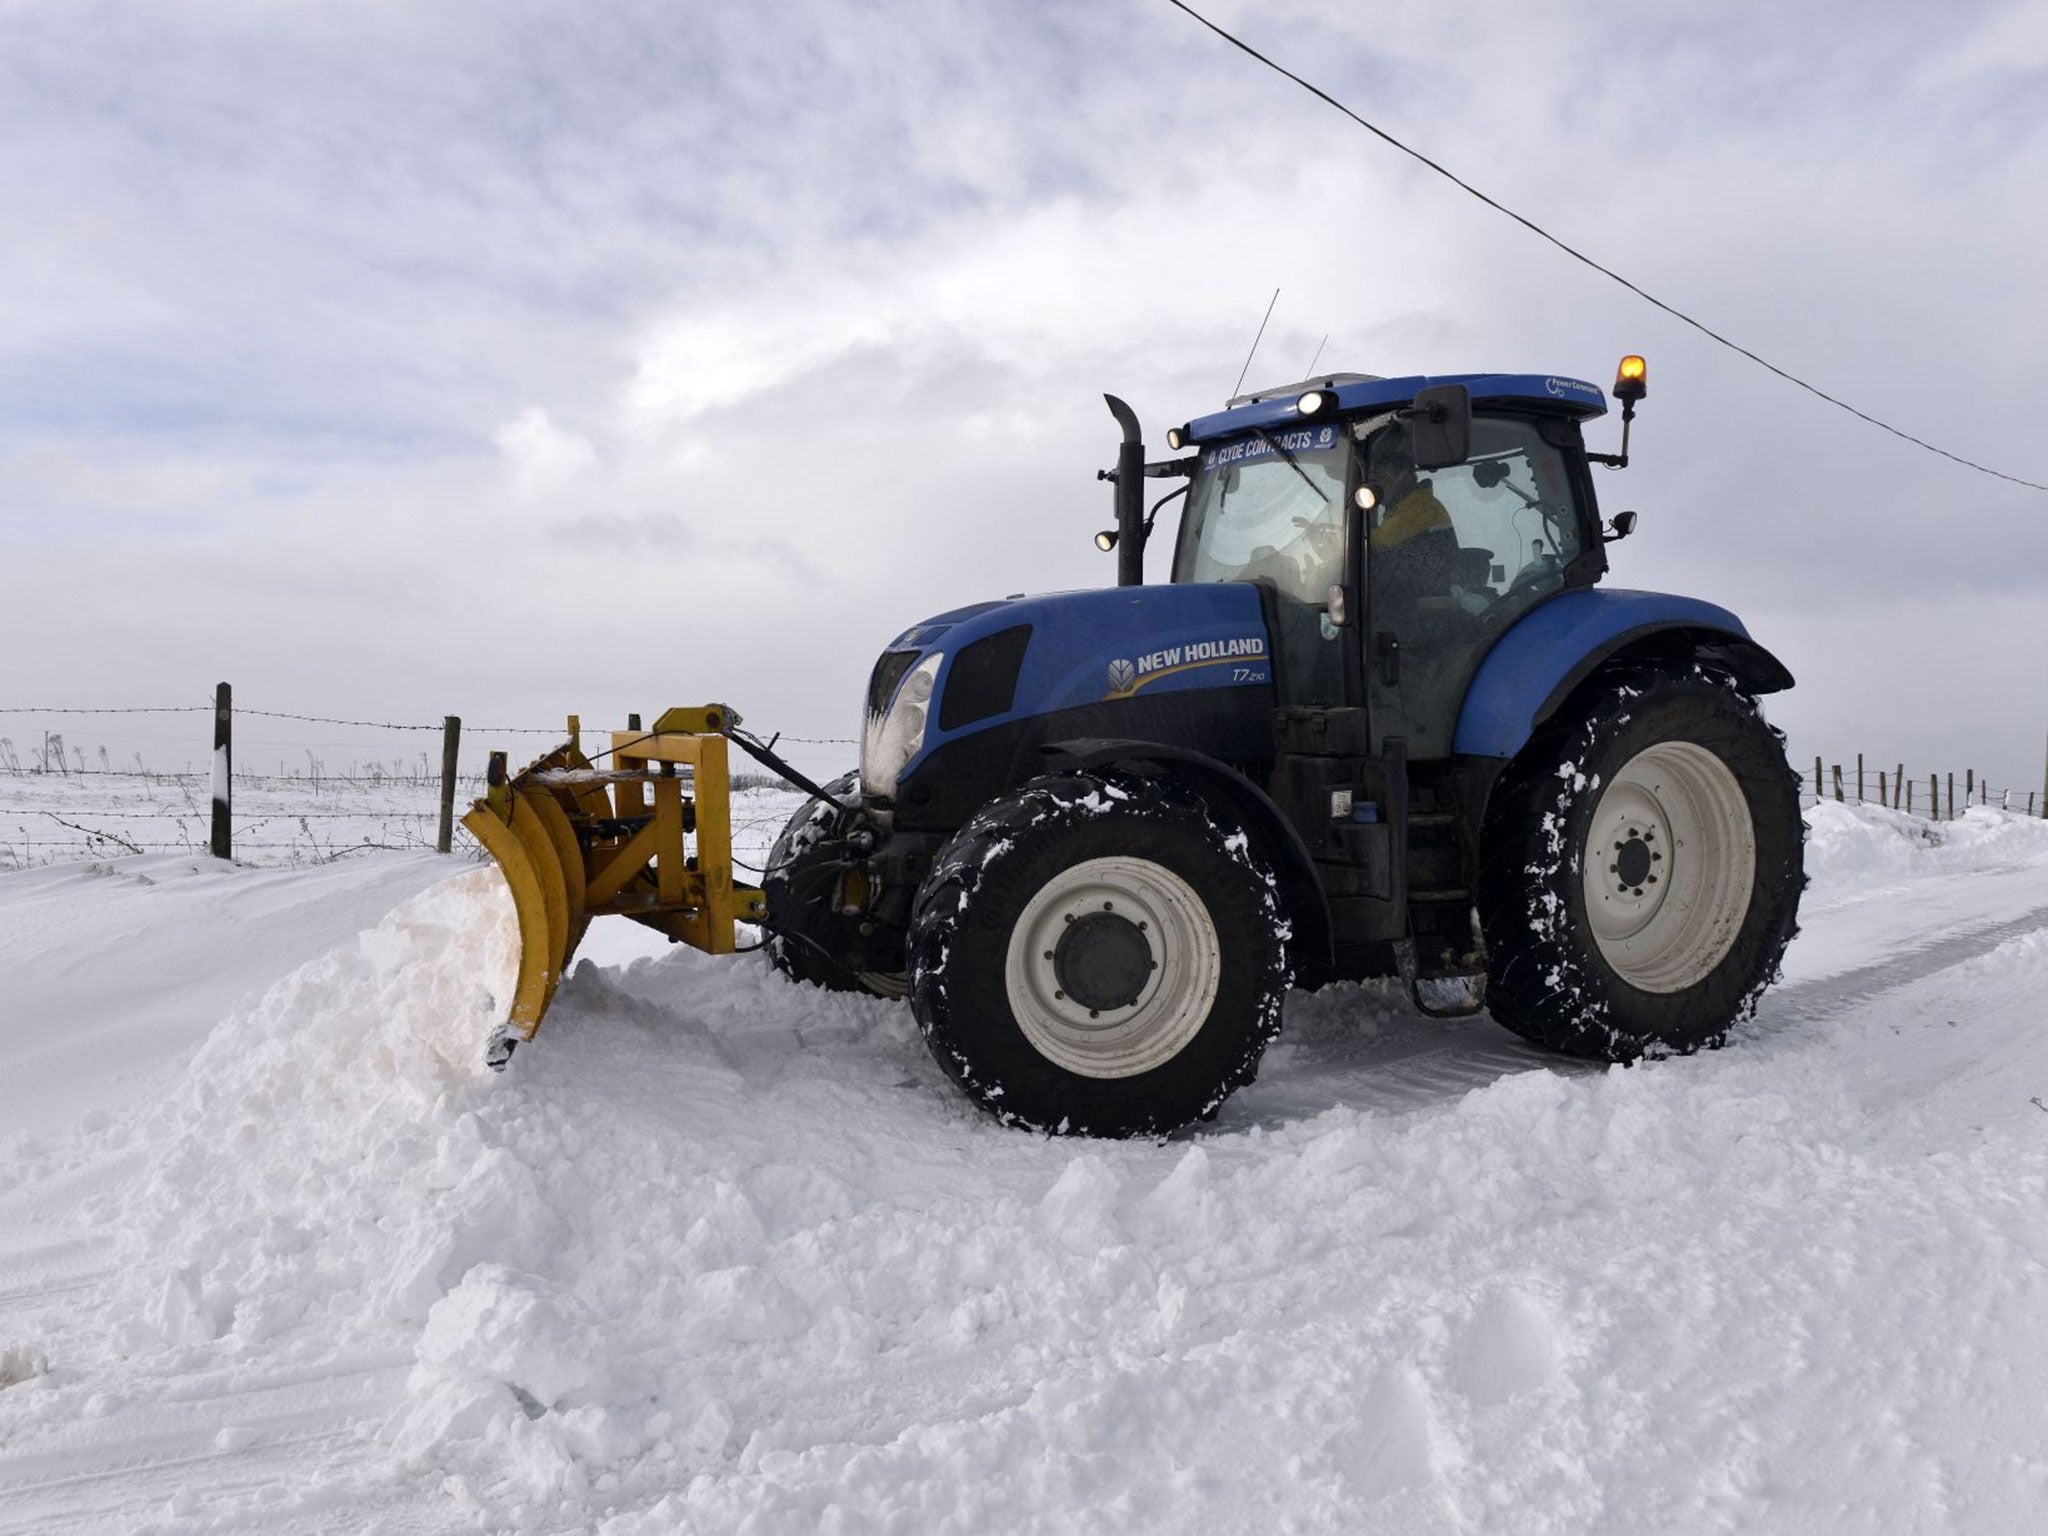 Snow ploughs have had their work cut out in Northern Ireland